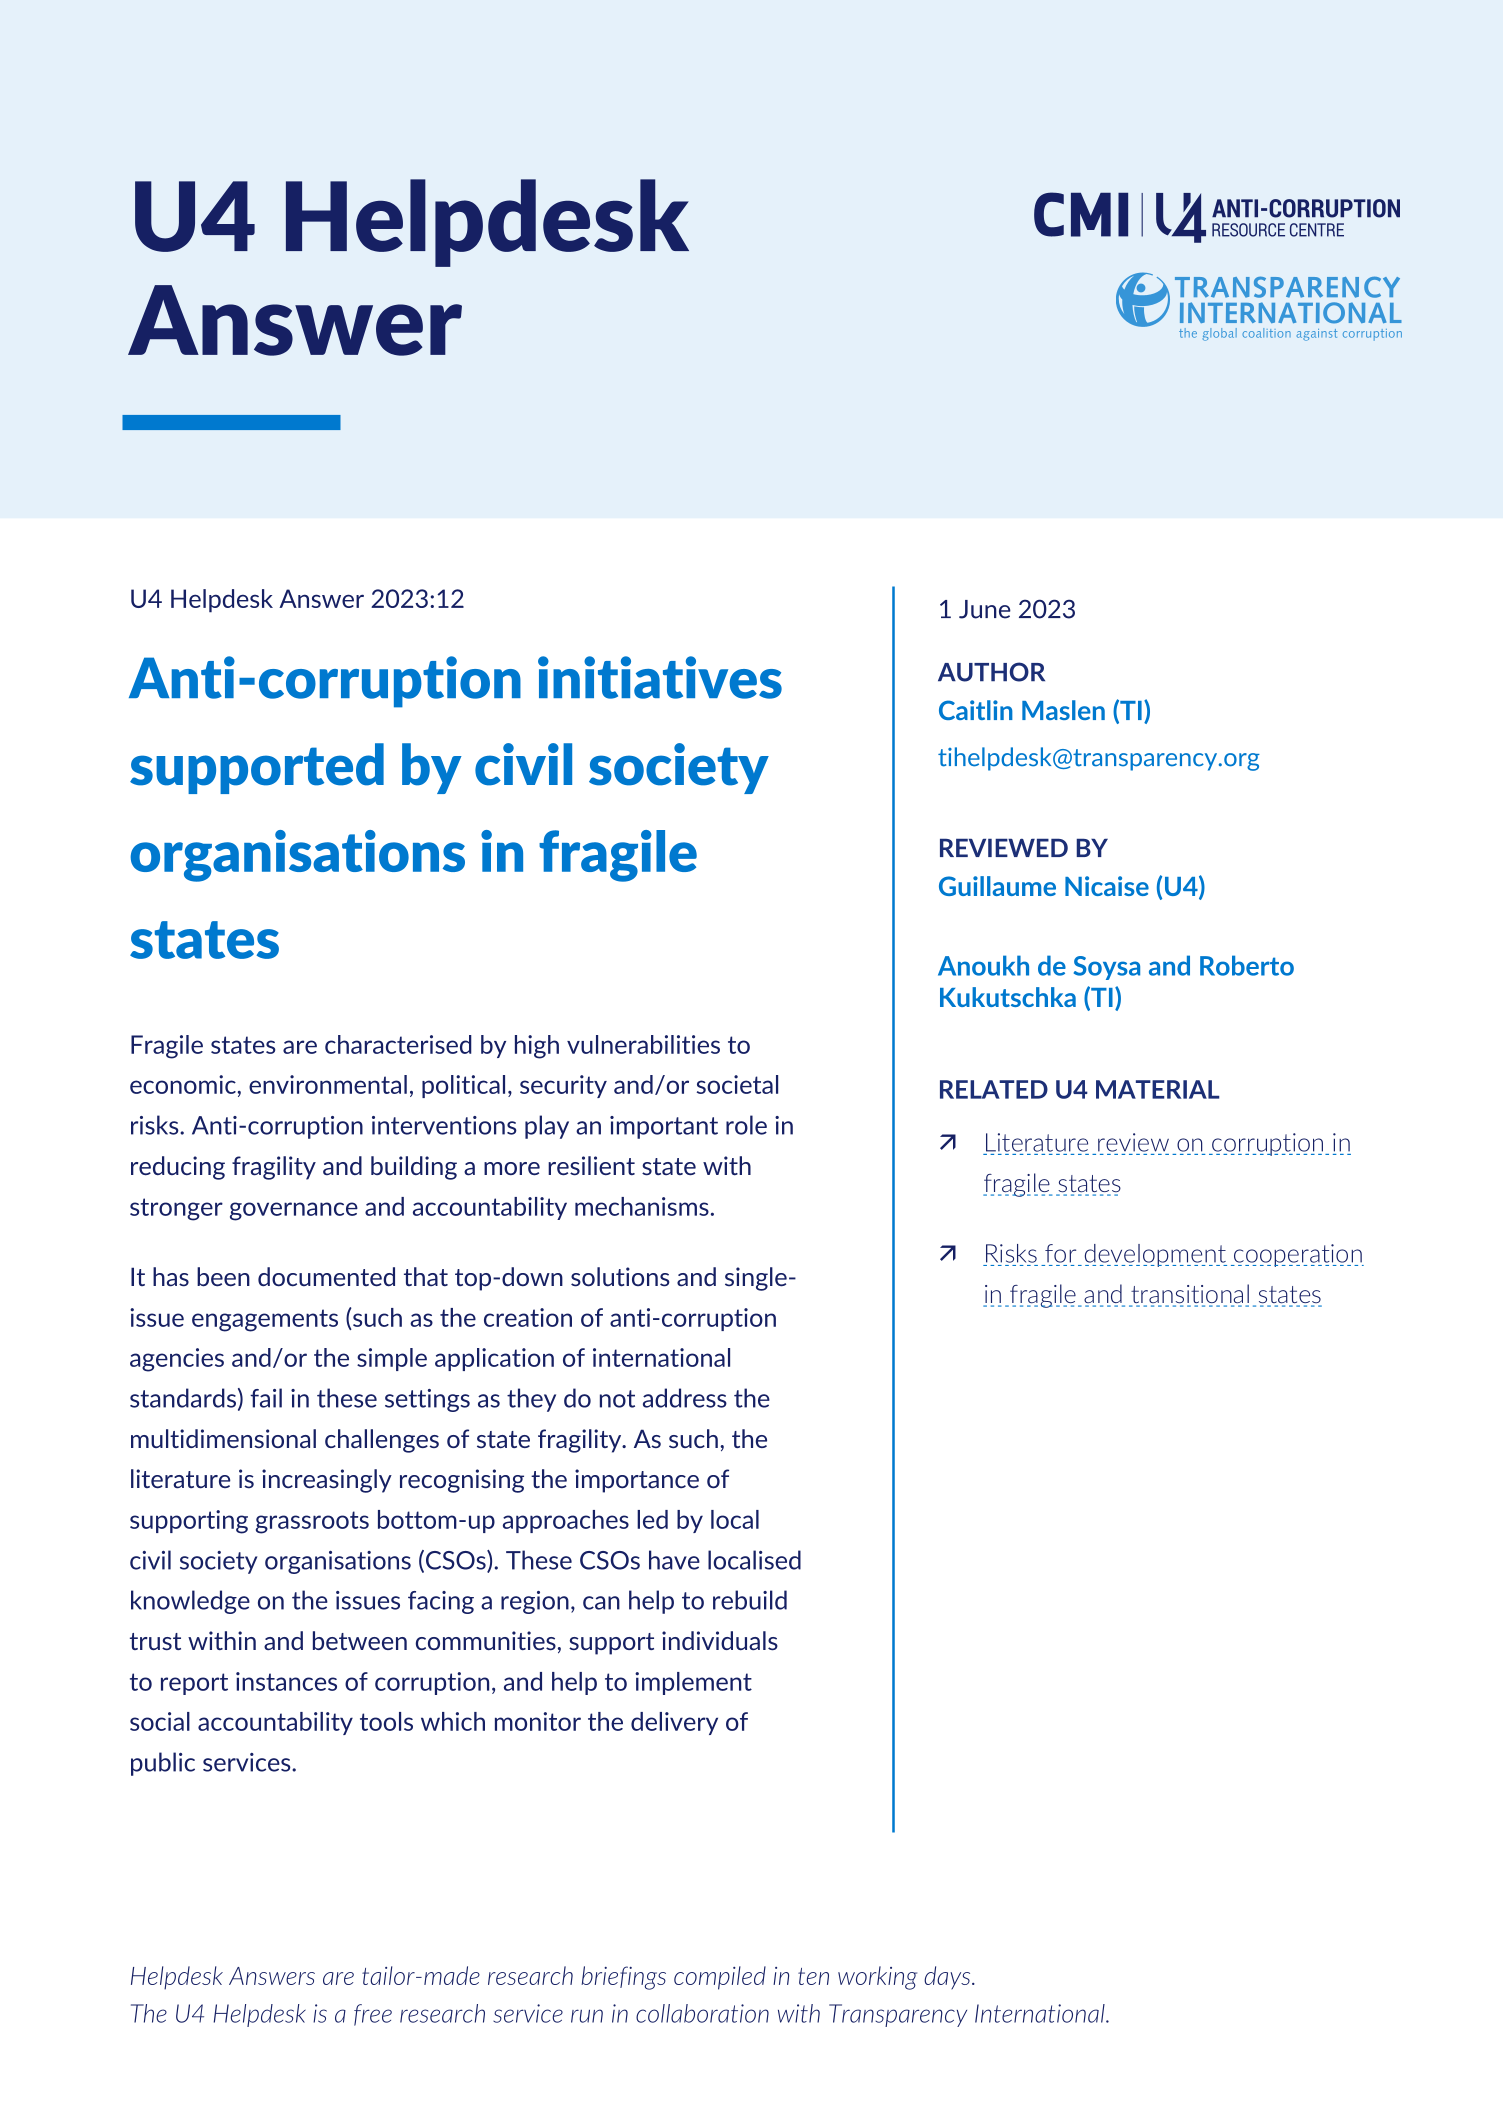 Anti-corruption initiatives supported by civil society organisations in fragile states